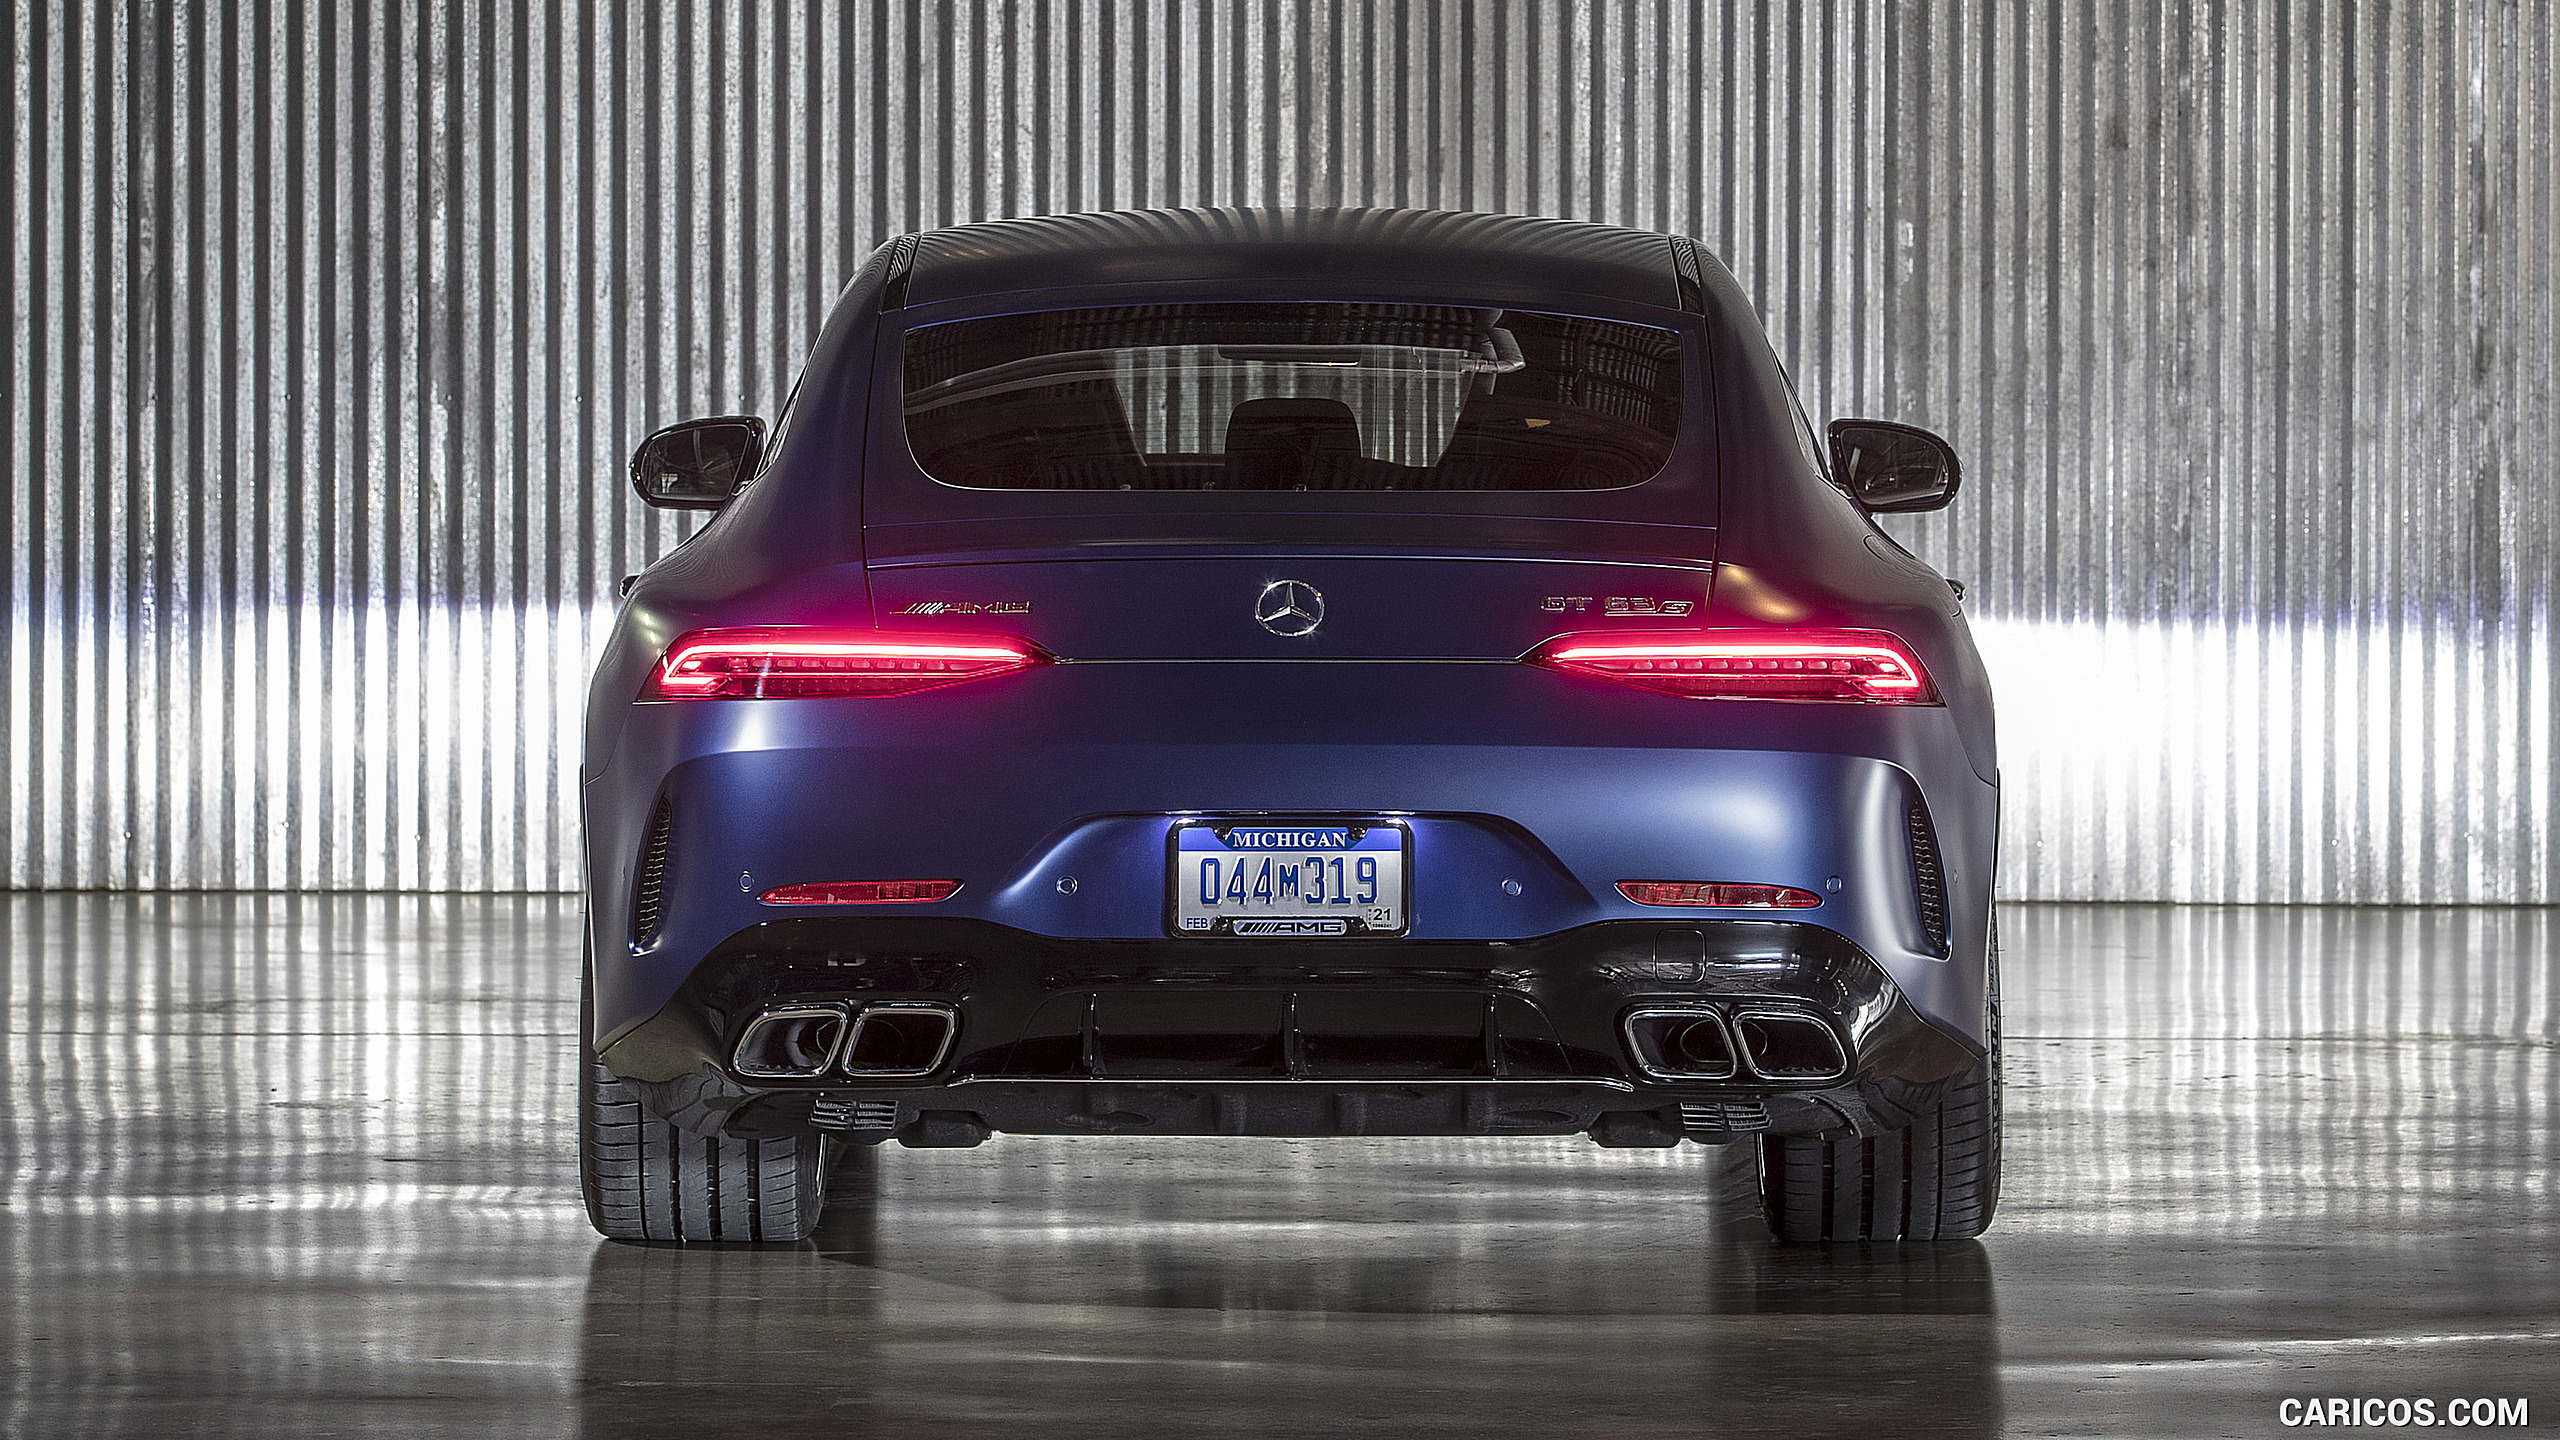 2019 Mercedes-AMG GT 63 S 4MATIC+ 4-Door Coupe - Rear, #140 of 427